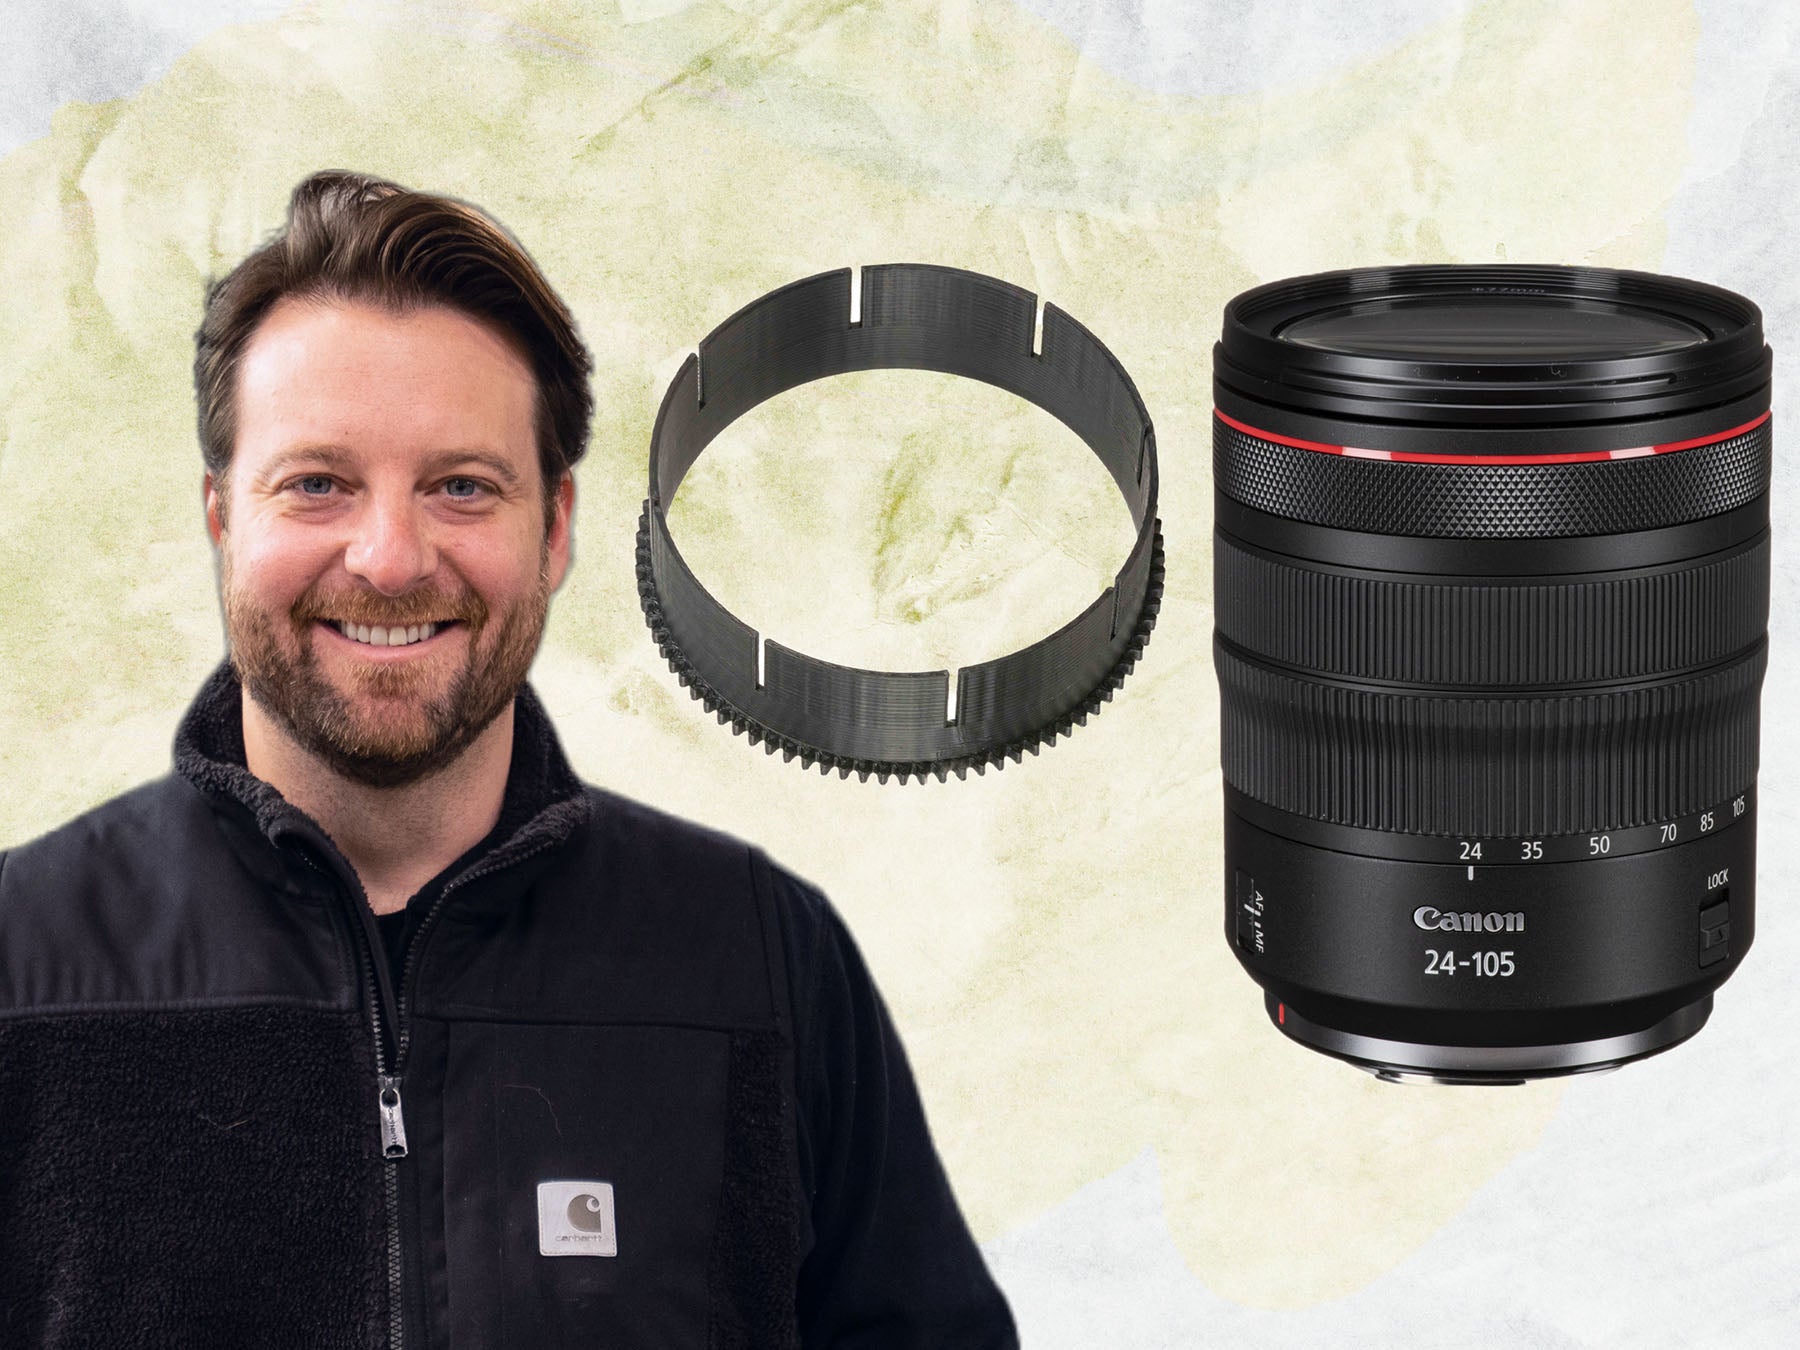 Sony 12-24mm F4L Lens and Zoom Gear Installation // Ikelite 200DL Underwater Housing